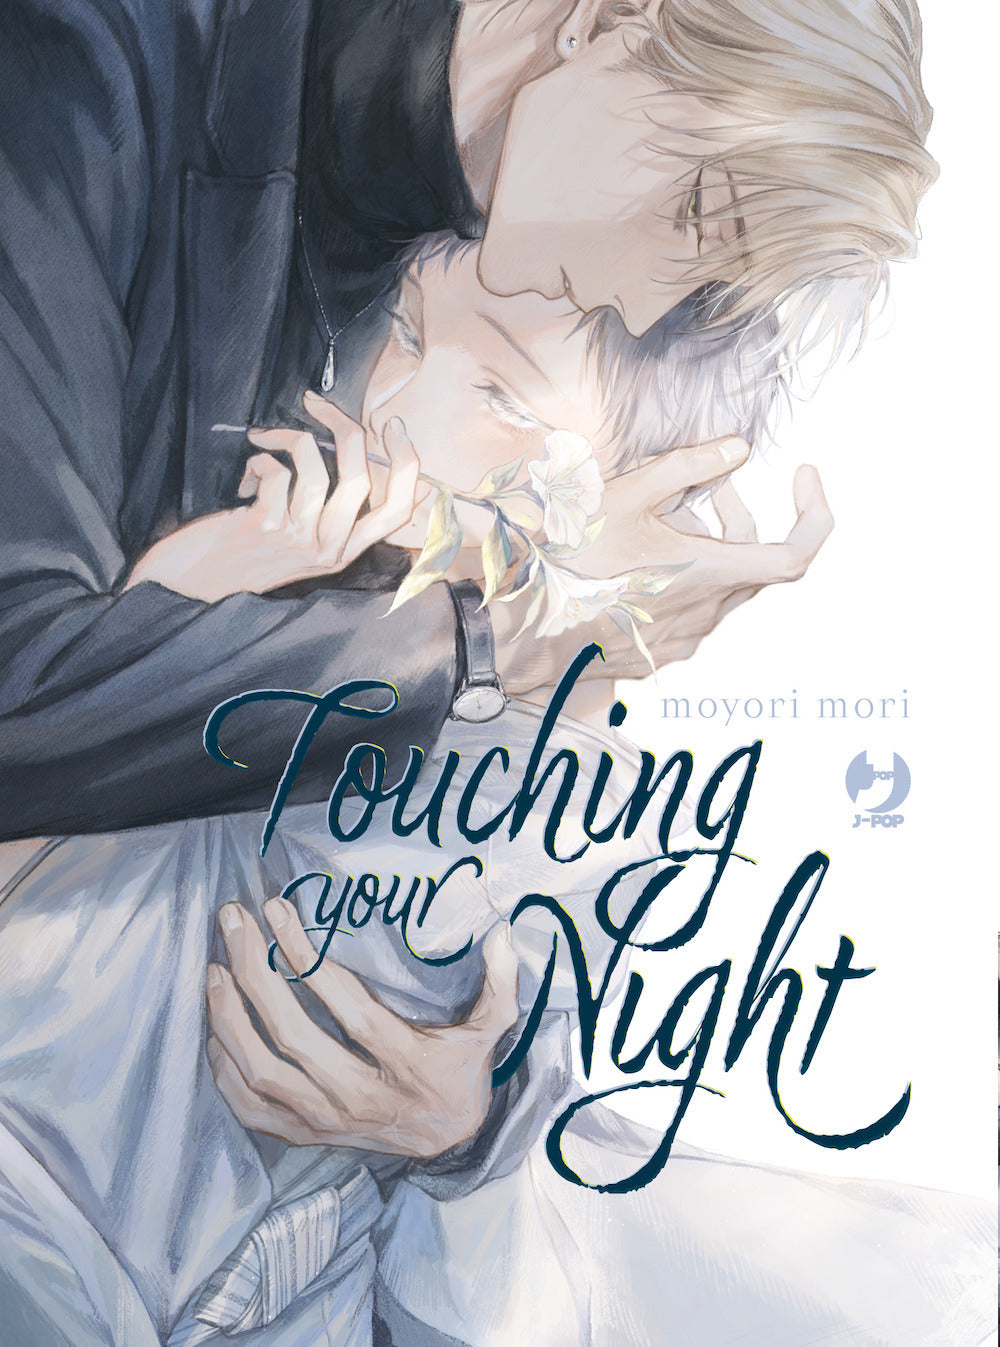 Touching your night